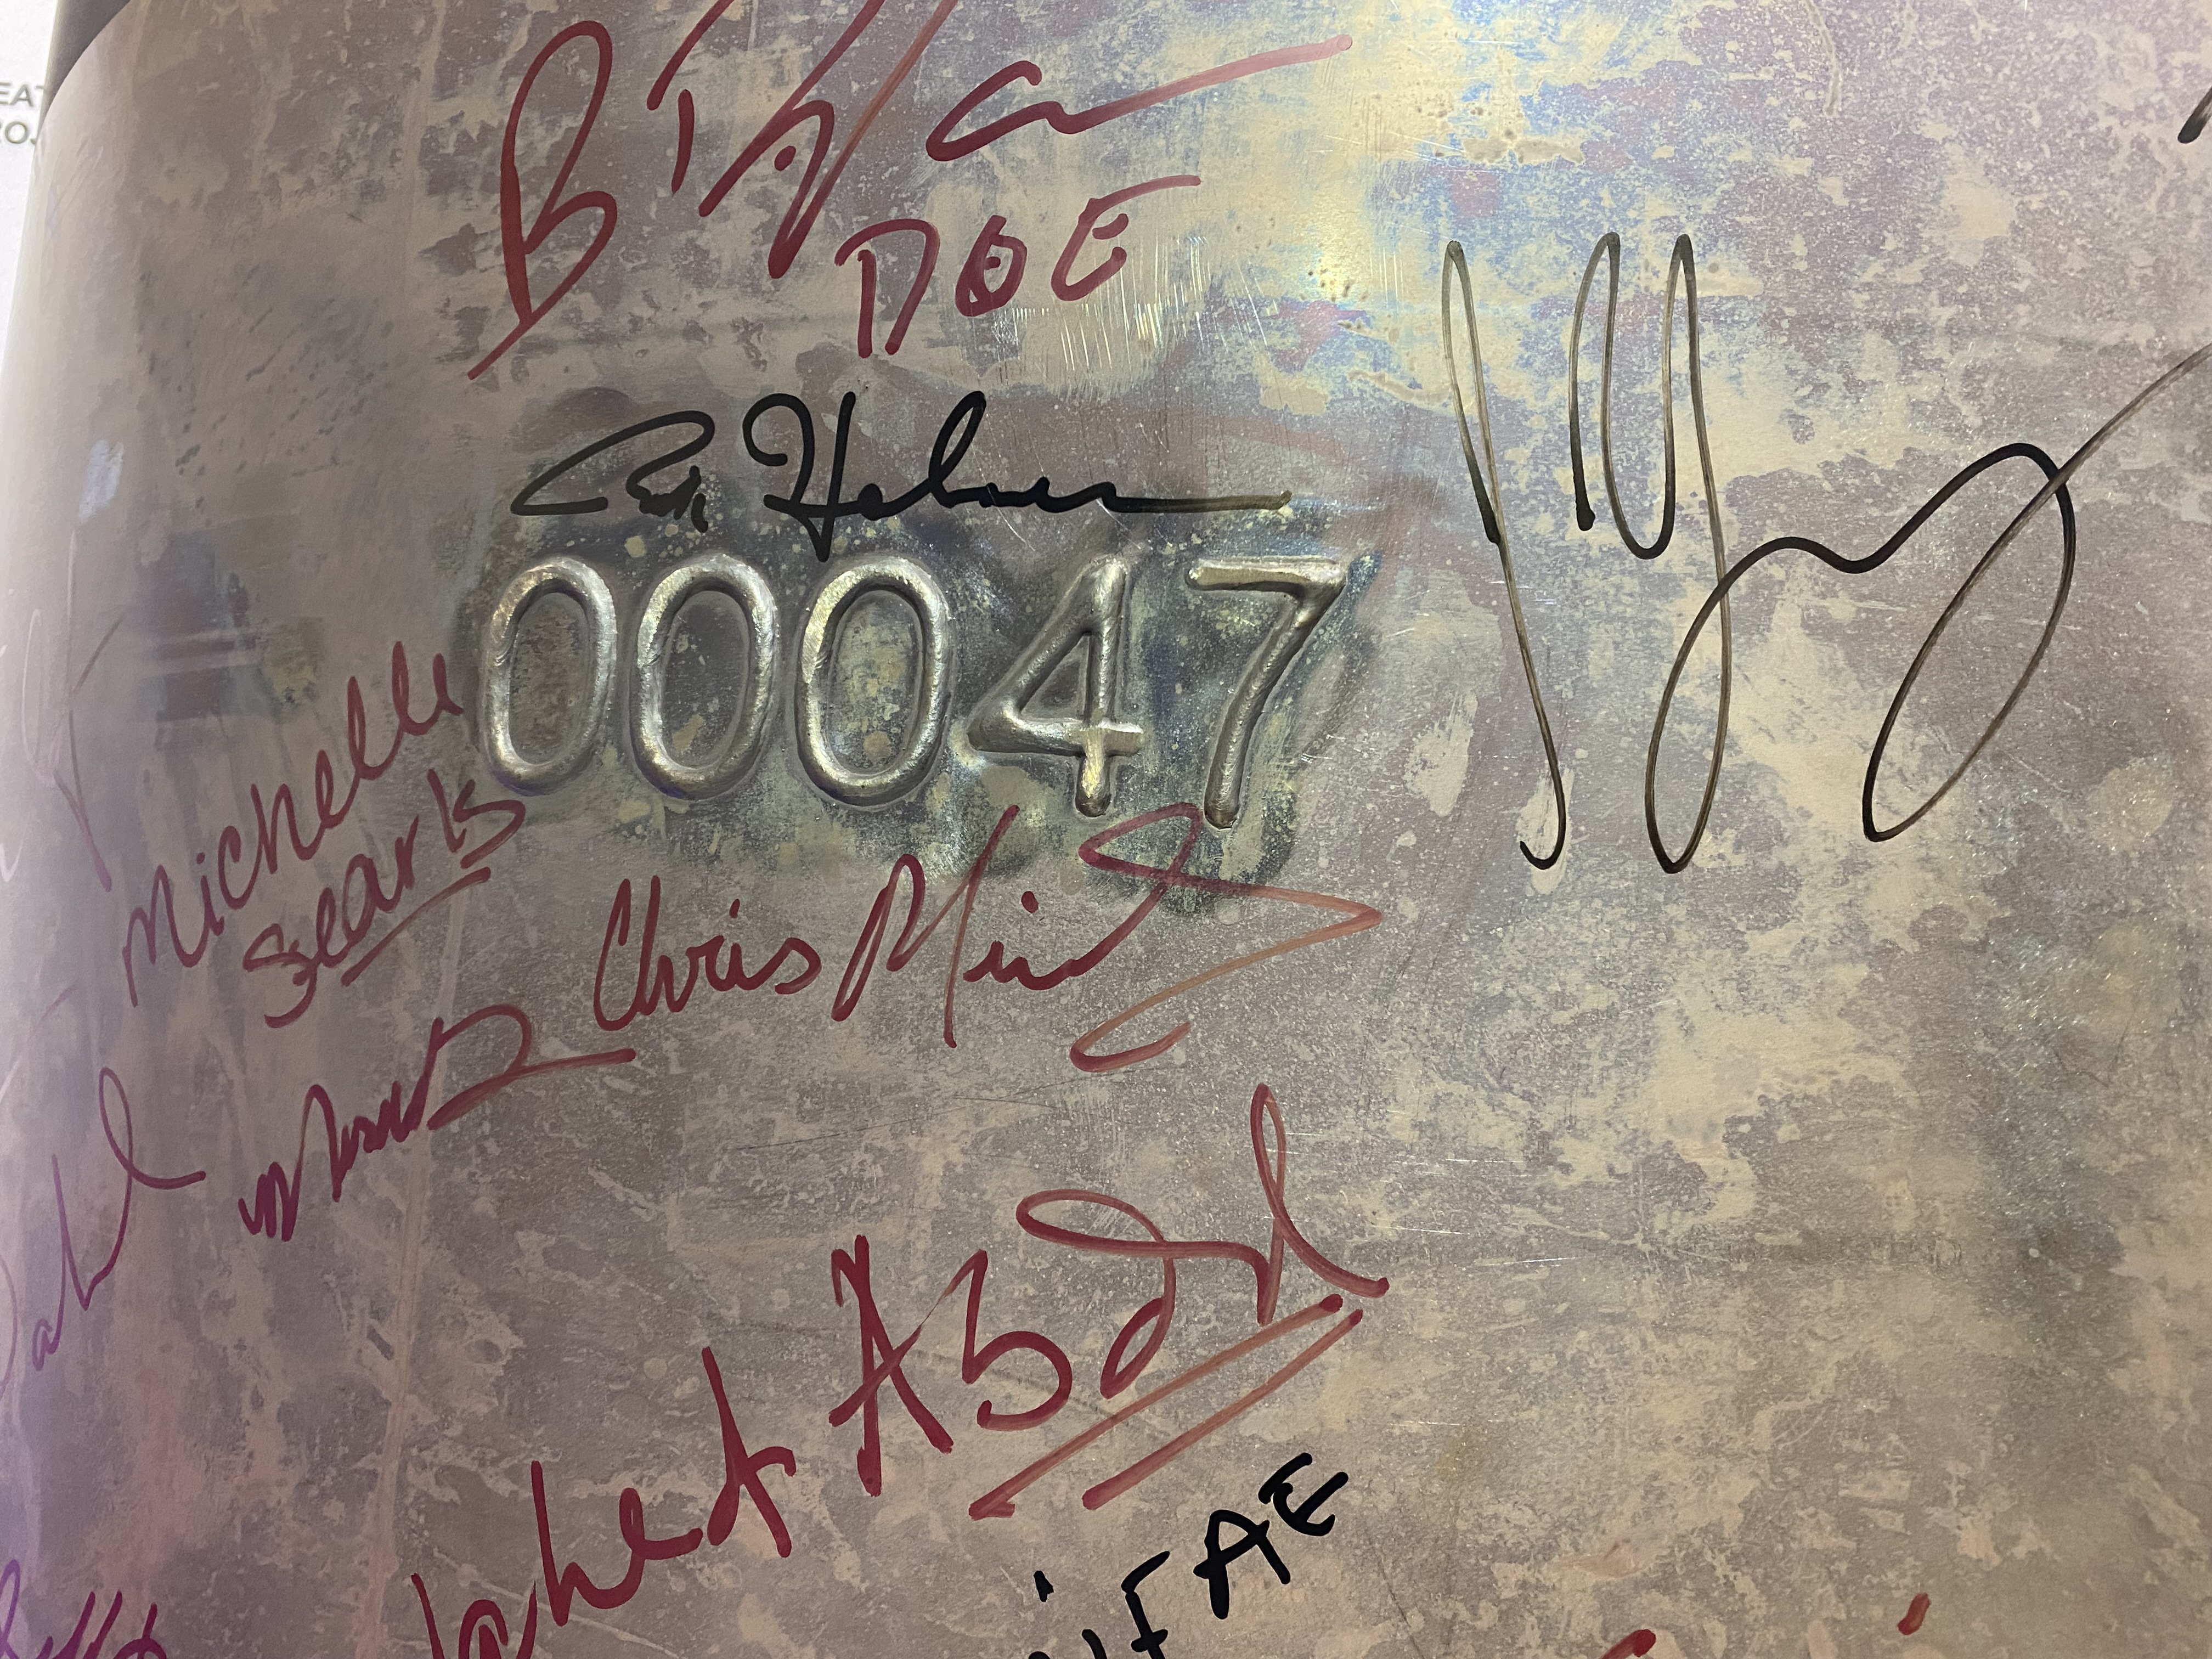 Top managers signed cast 00047 – the first glass produced at the Waste Treatment Plant at Hanford